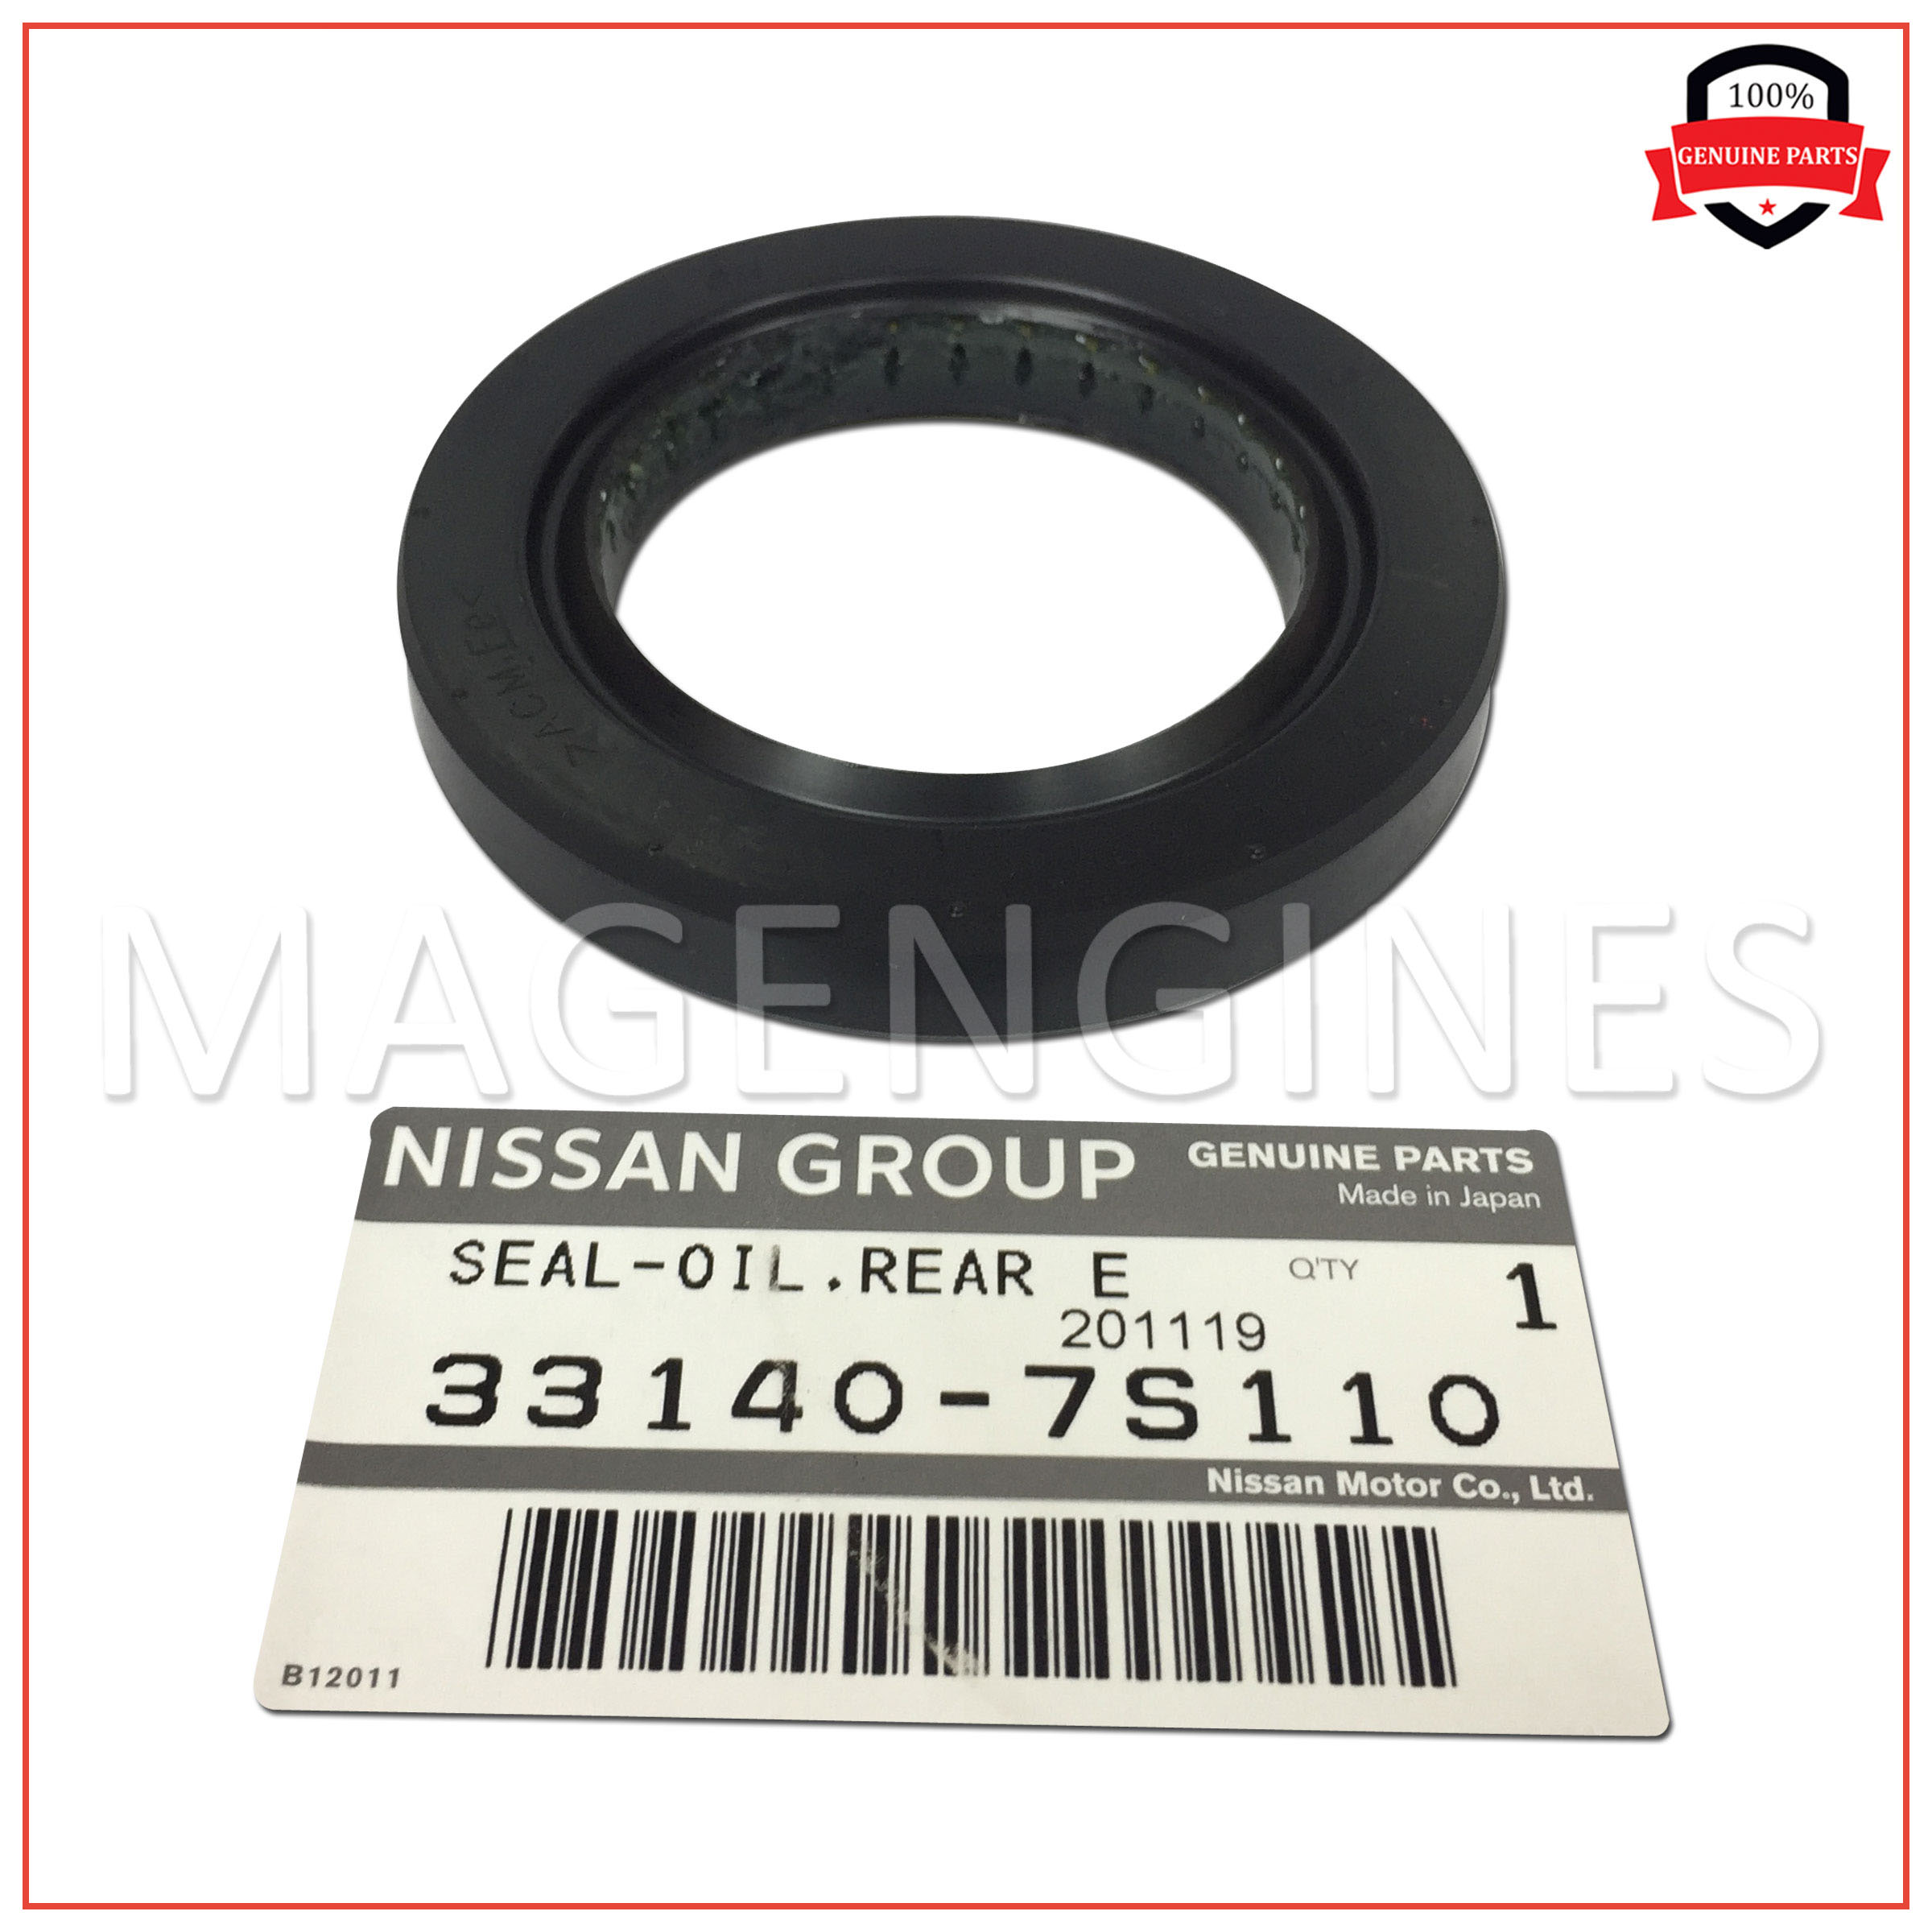 331407S110 Genuine Nissan SEAL-OIL,REAR EXTENSION 33140-7S110